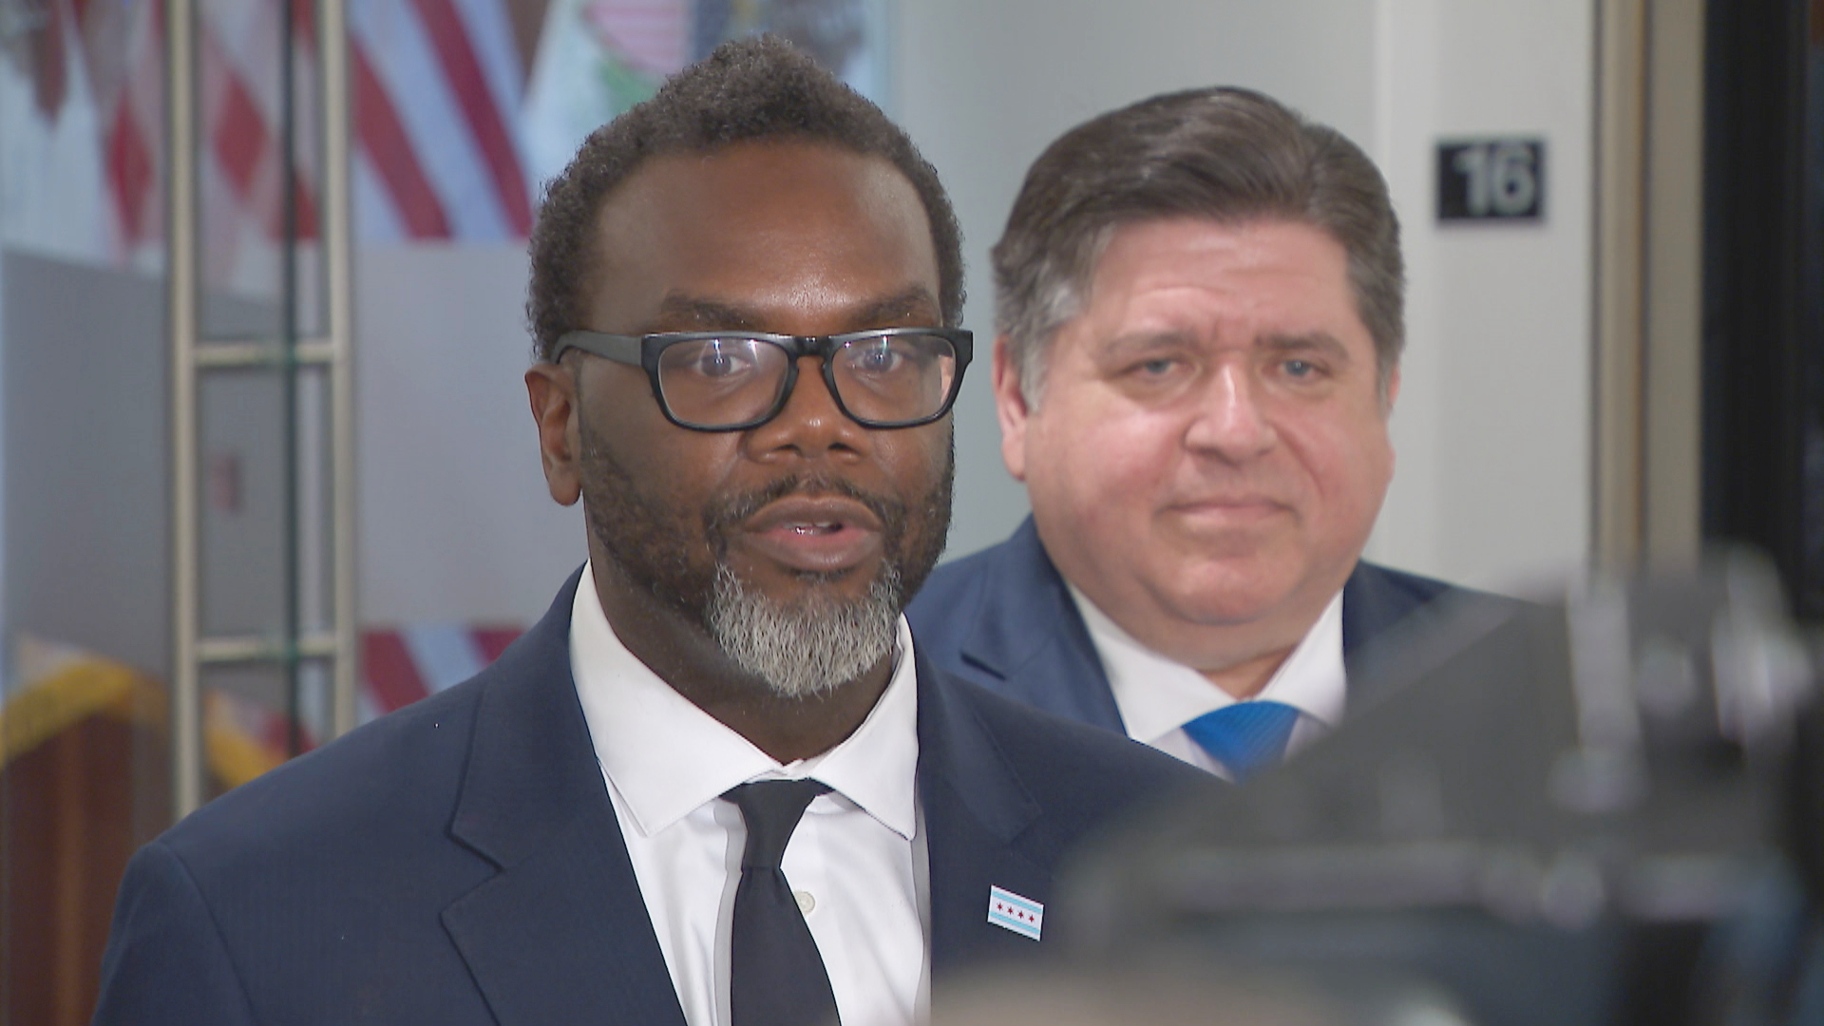 Mayor S Porn Star - We Share a Lot in Common': Mayor-Elect Brandon Johnson Meets With Gov. J.B.  Pritzker After Runoff Victory | Chicago News | WTTW